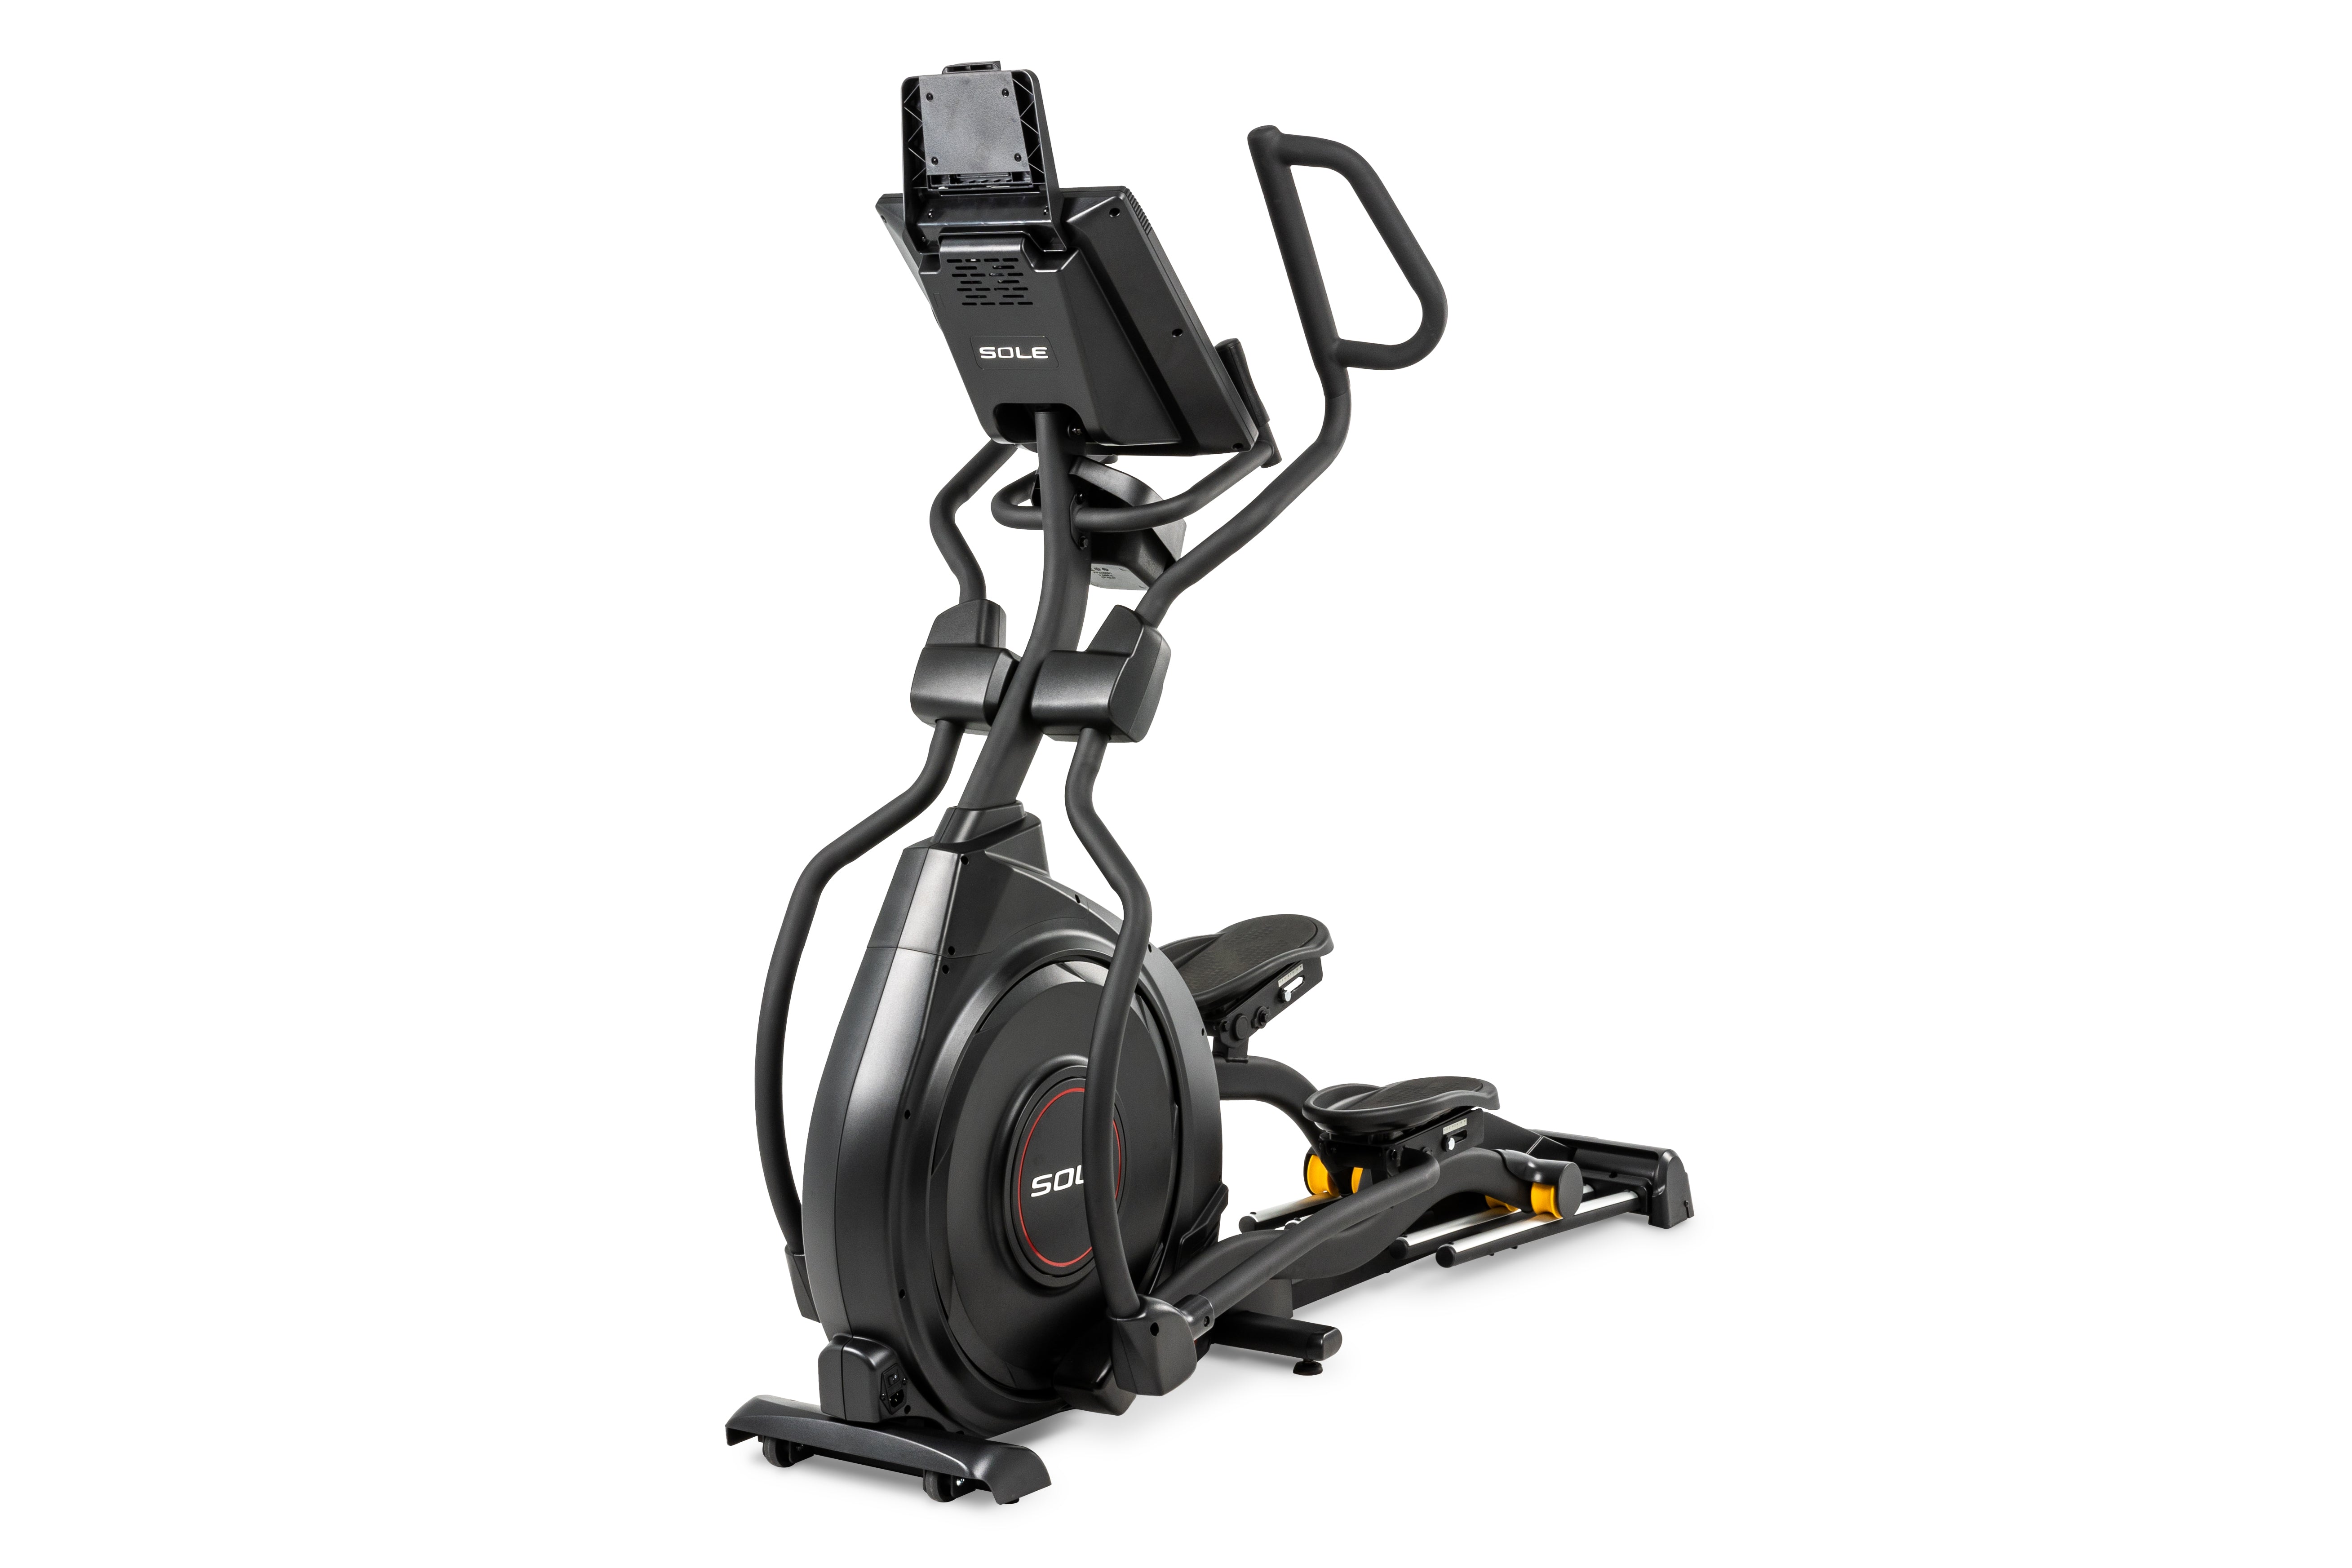 An image of the Sole E95 elliptical trainer, featuring a sleek black design with prominent SOLE branding on the flywheel, a digital display mounted at the top, and ergonomic handlebars.